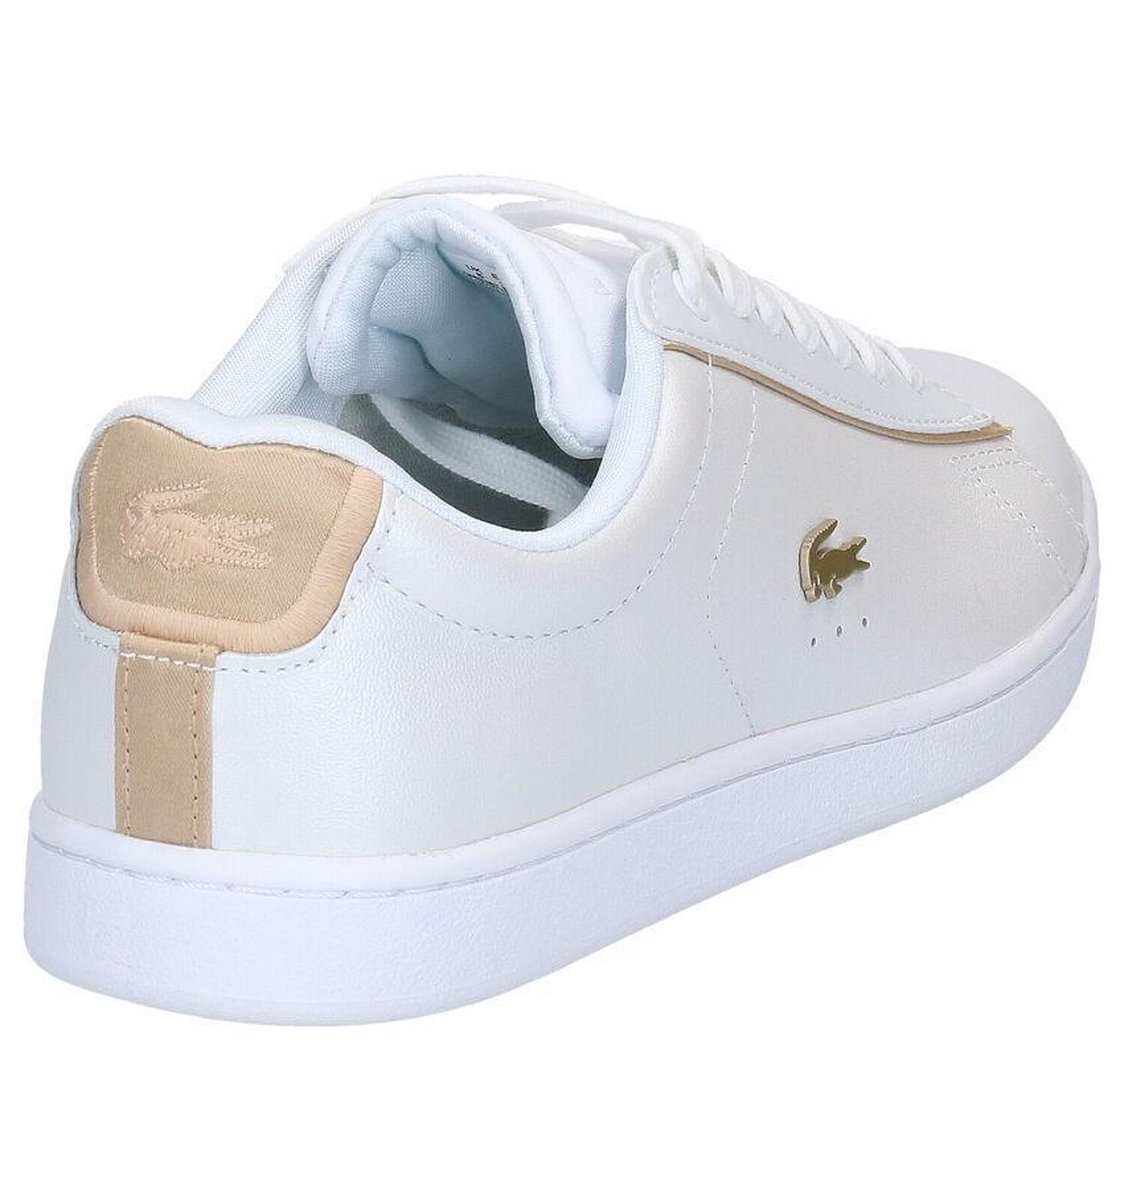 Lacoste Carnaby Evo Witte Sneakers Dames 42 | bol.com